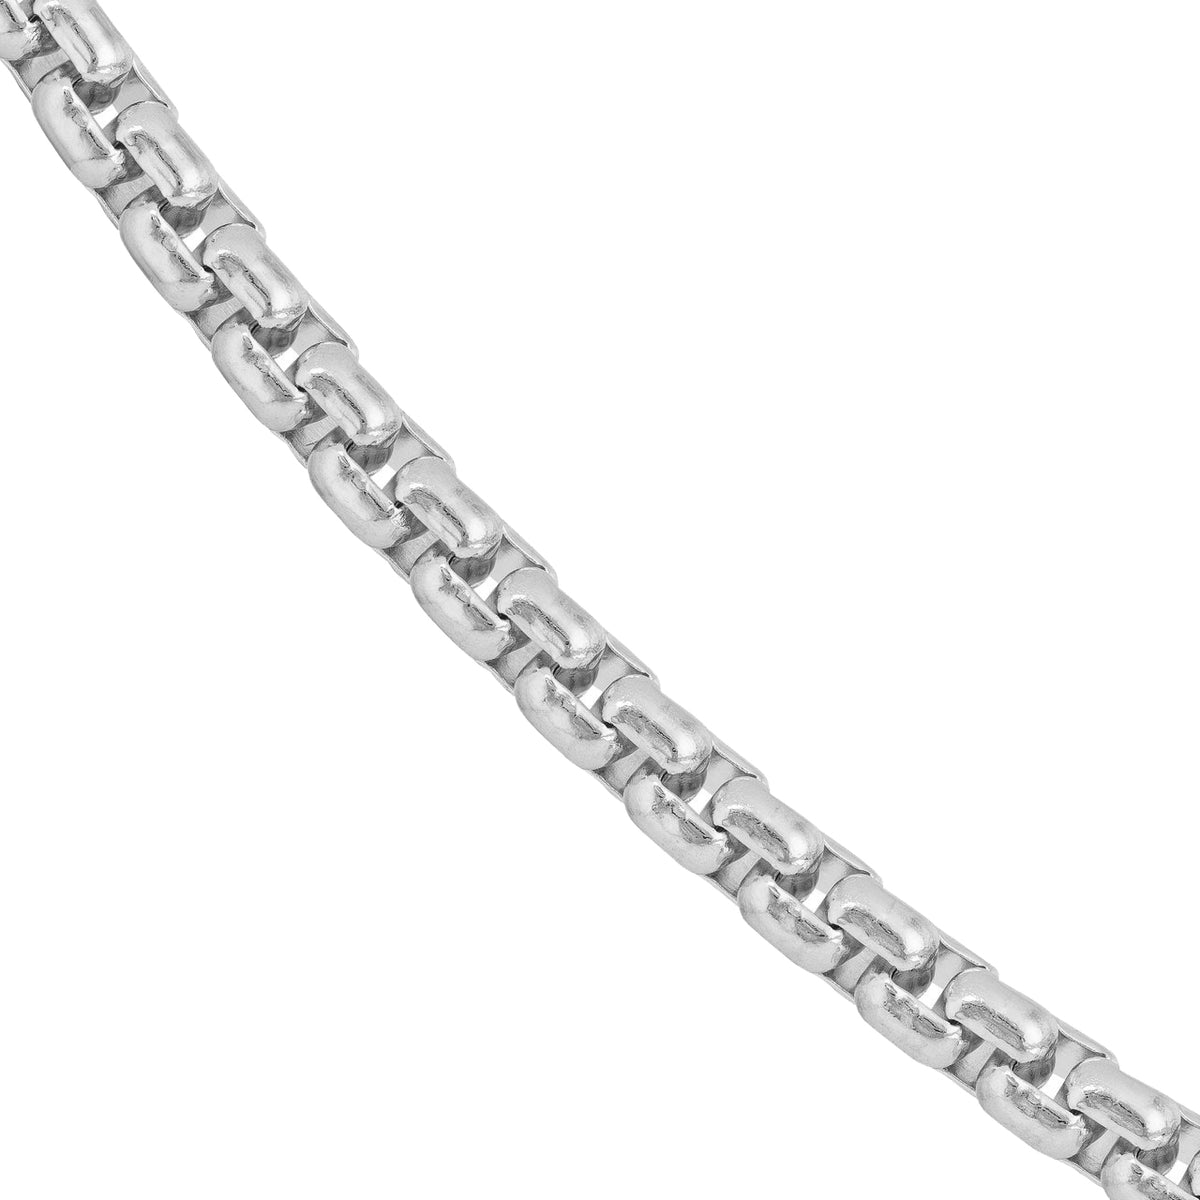 Solid 14k White Gold 5mm Round Box Chain Necklace with Lobster Lock